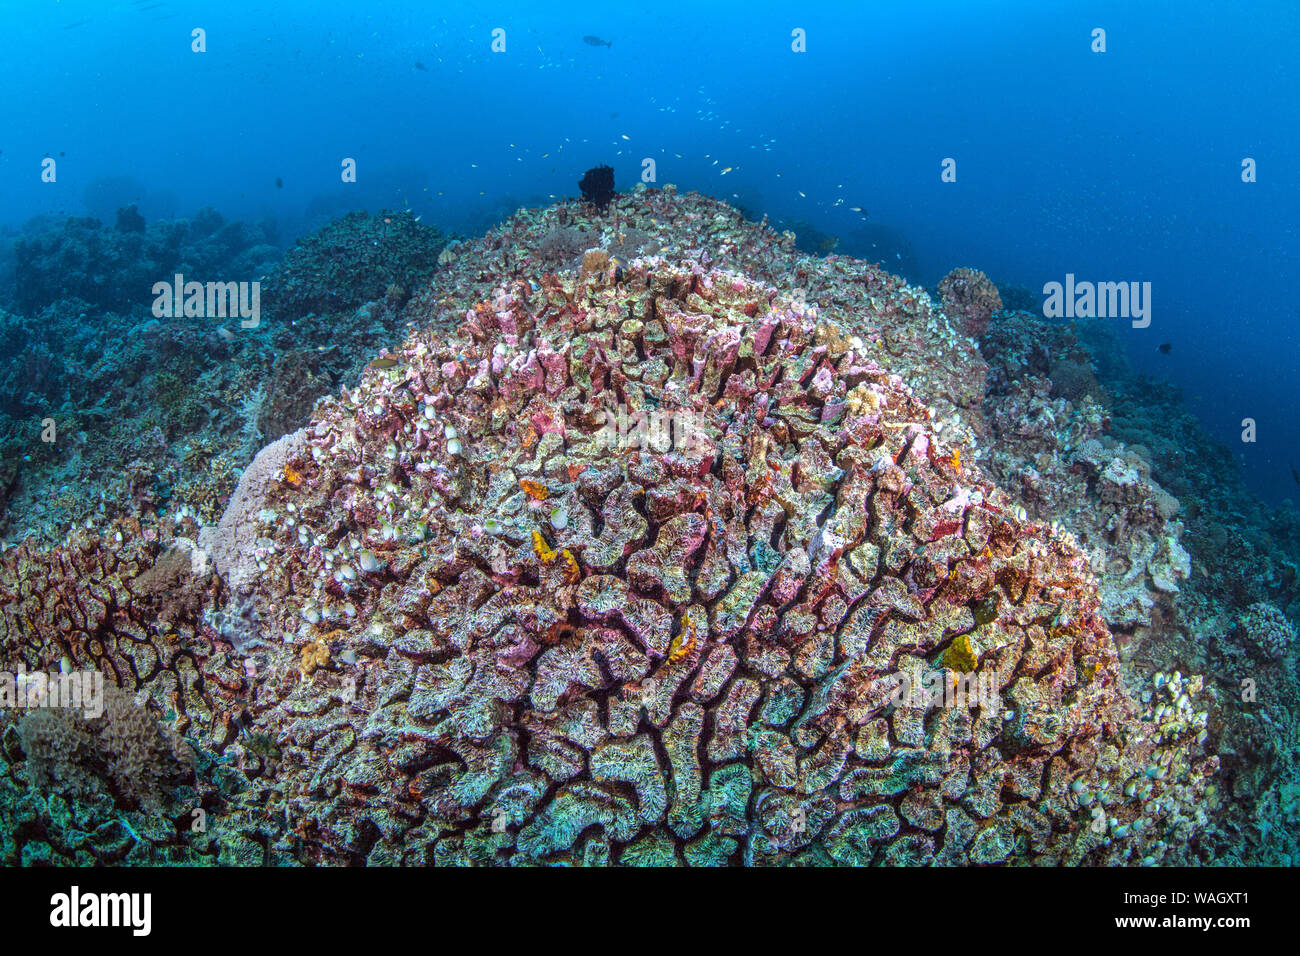 Dead brain coral in the foreground in a reef of decaying corals. Spratly Islands, South China Sea. July, 2014 Stock Photo